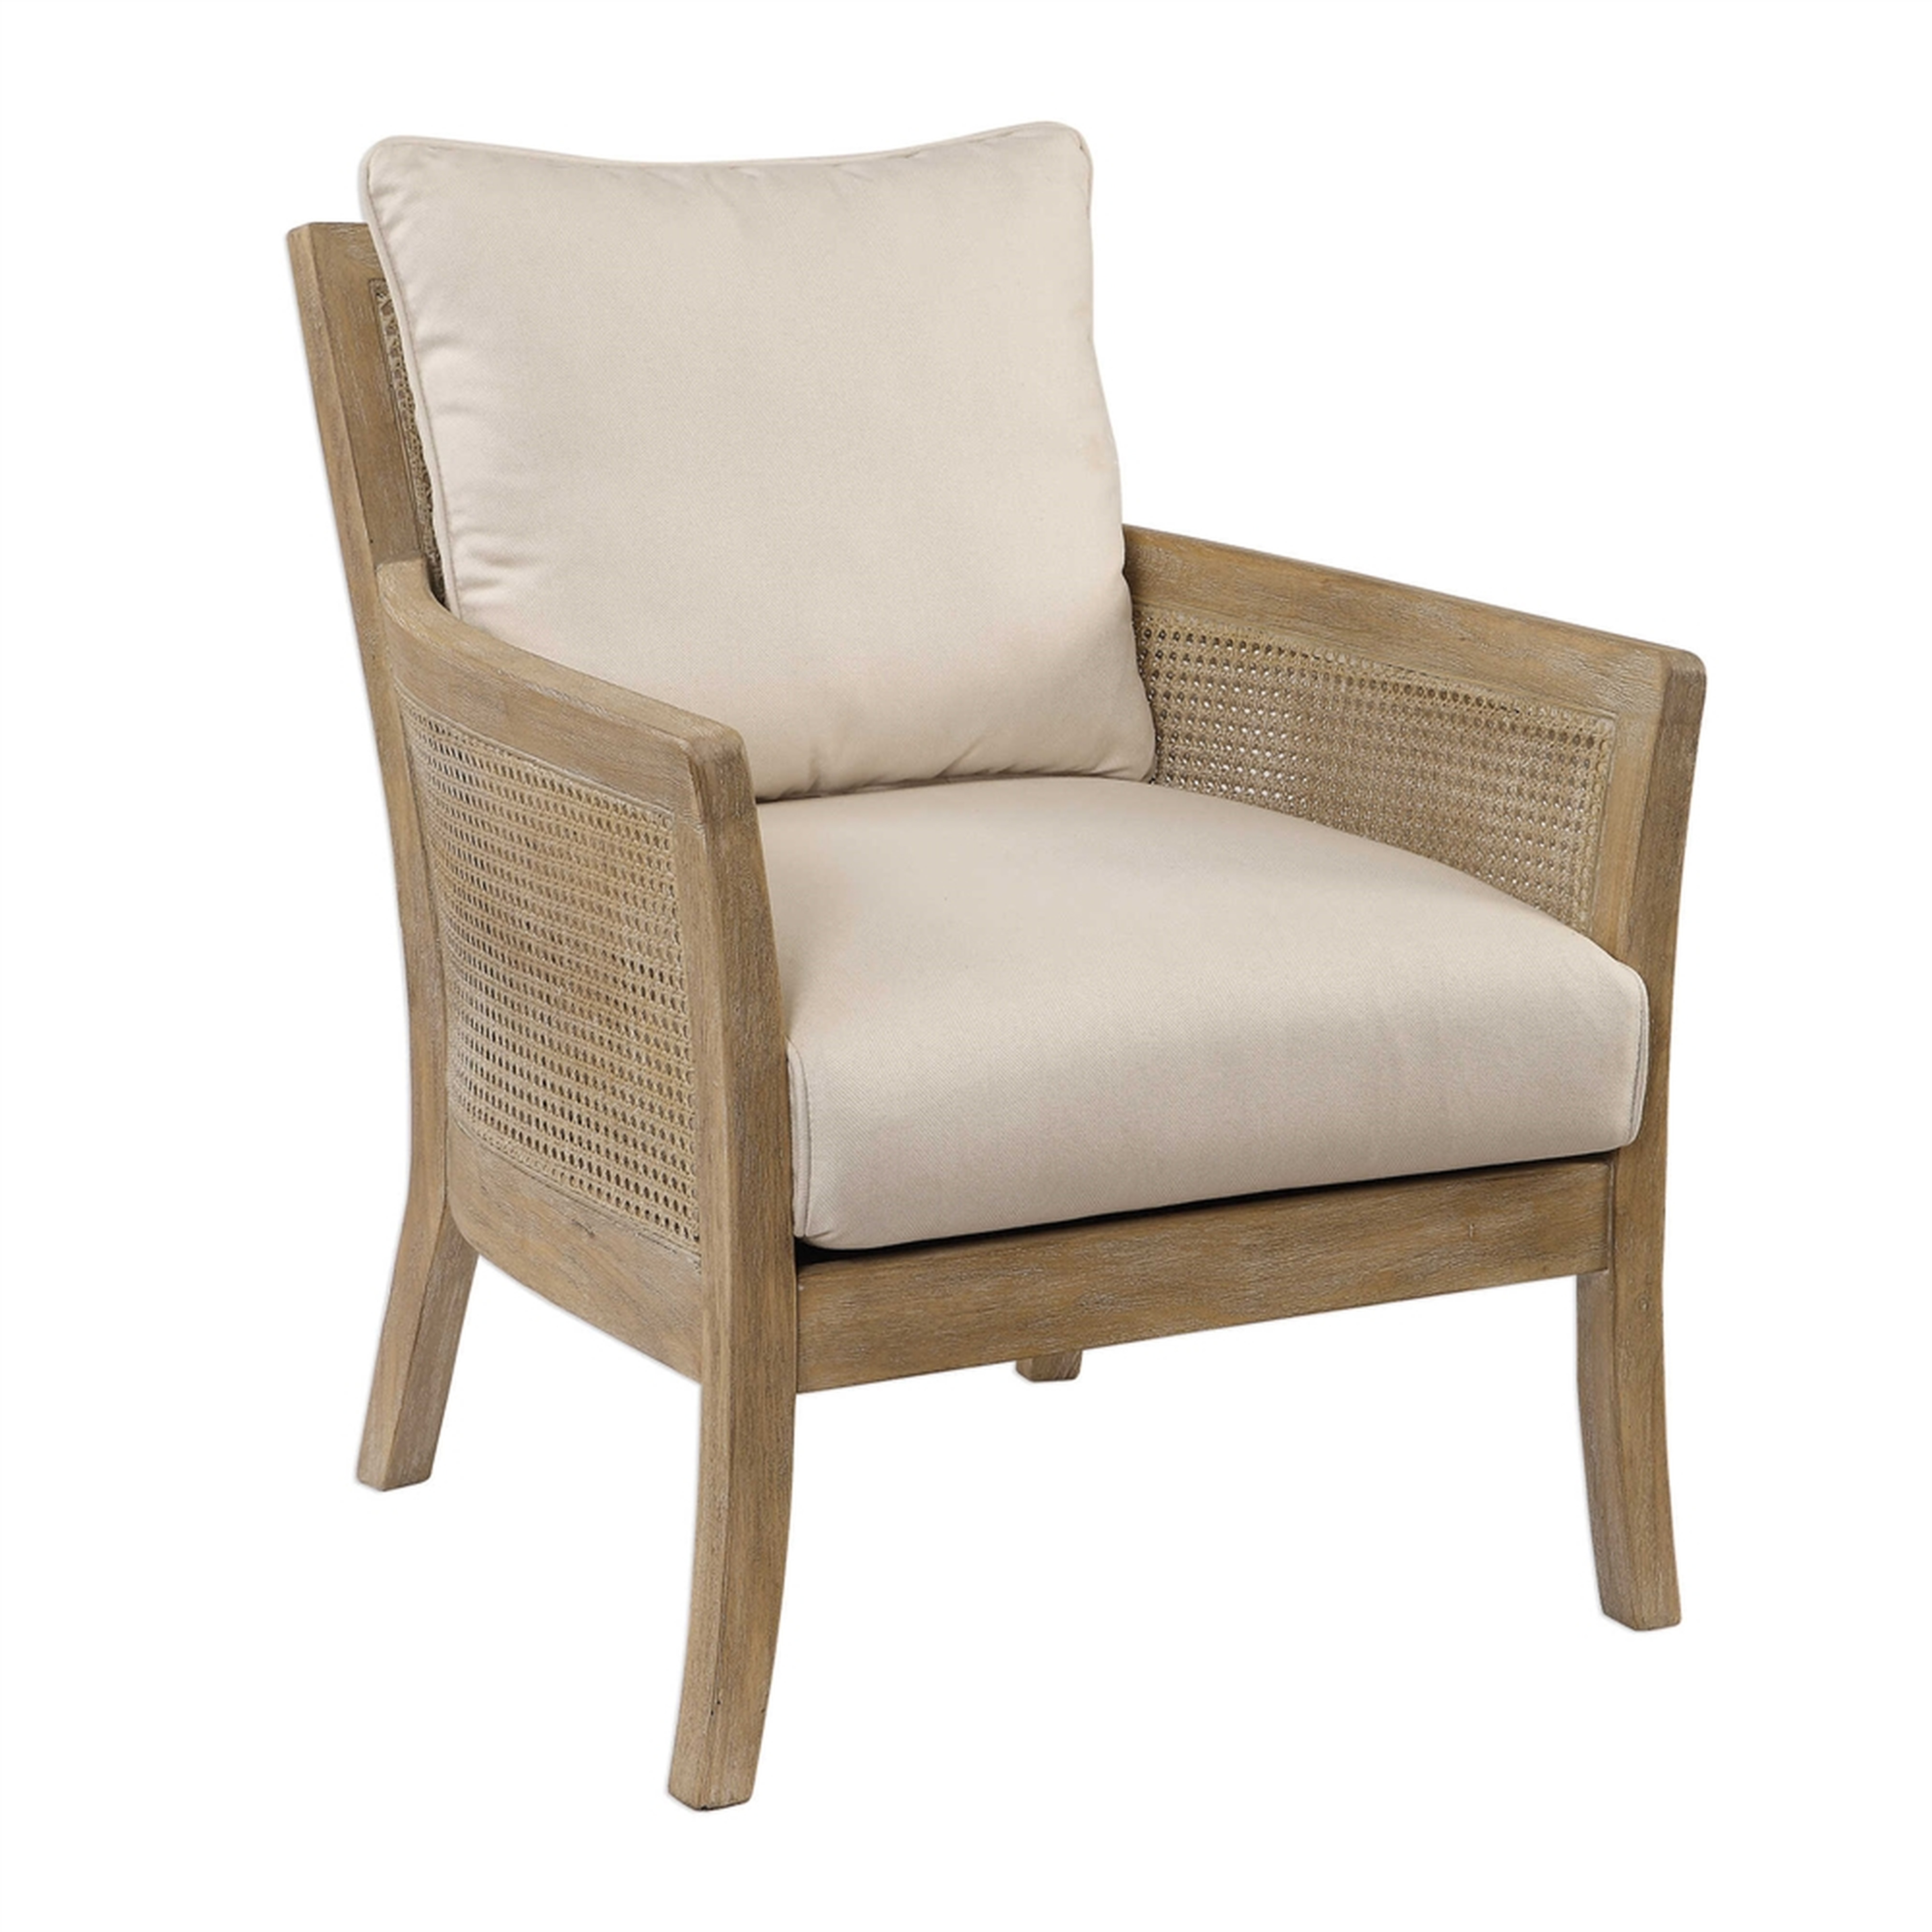 Encore Cane Armchair, Natural - Hudsonhill Foundry